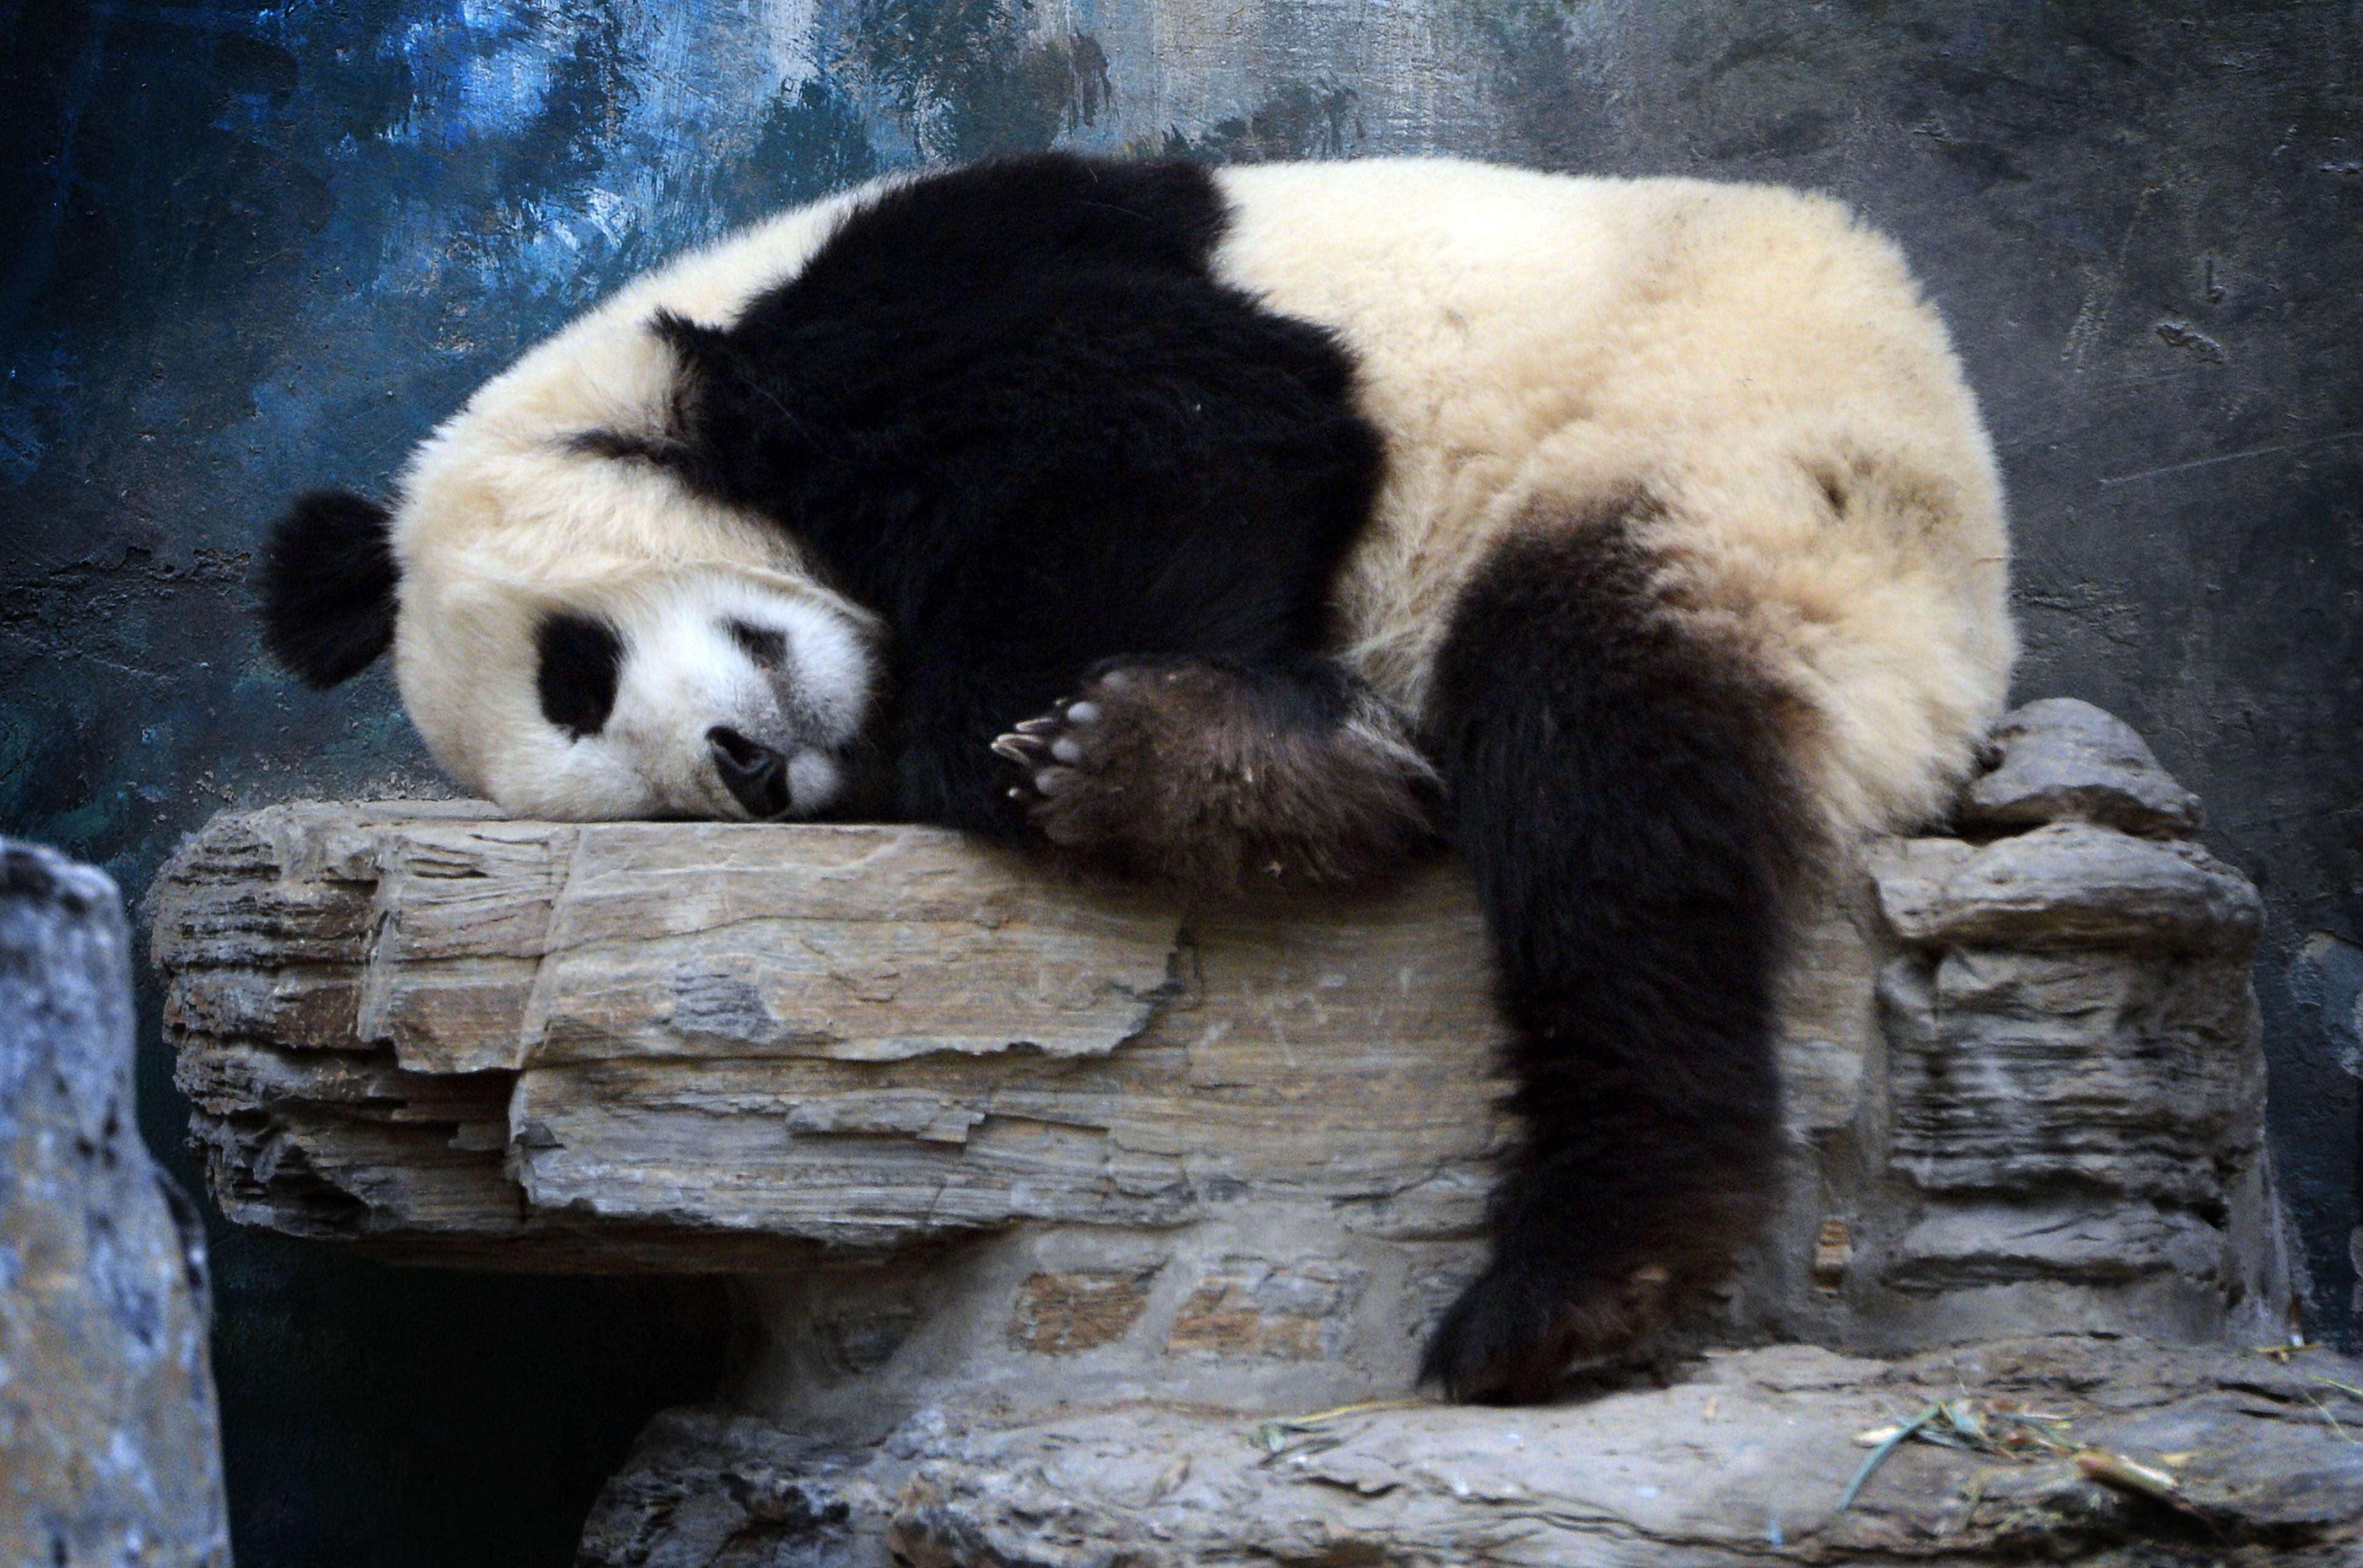 A giant panda relaxes in the Olympic Games Panda Bear enclosure at Beijing Zoo. Photo: AFP